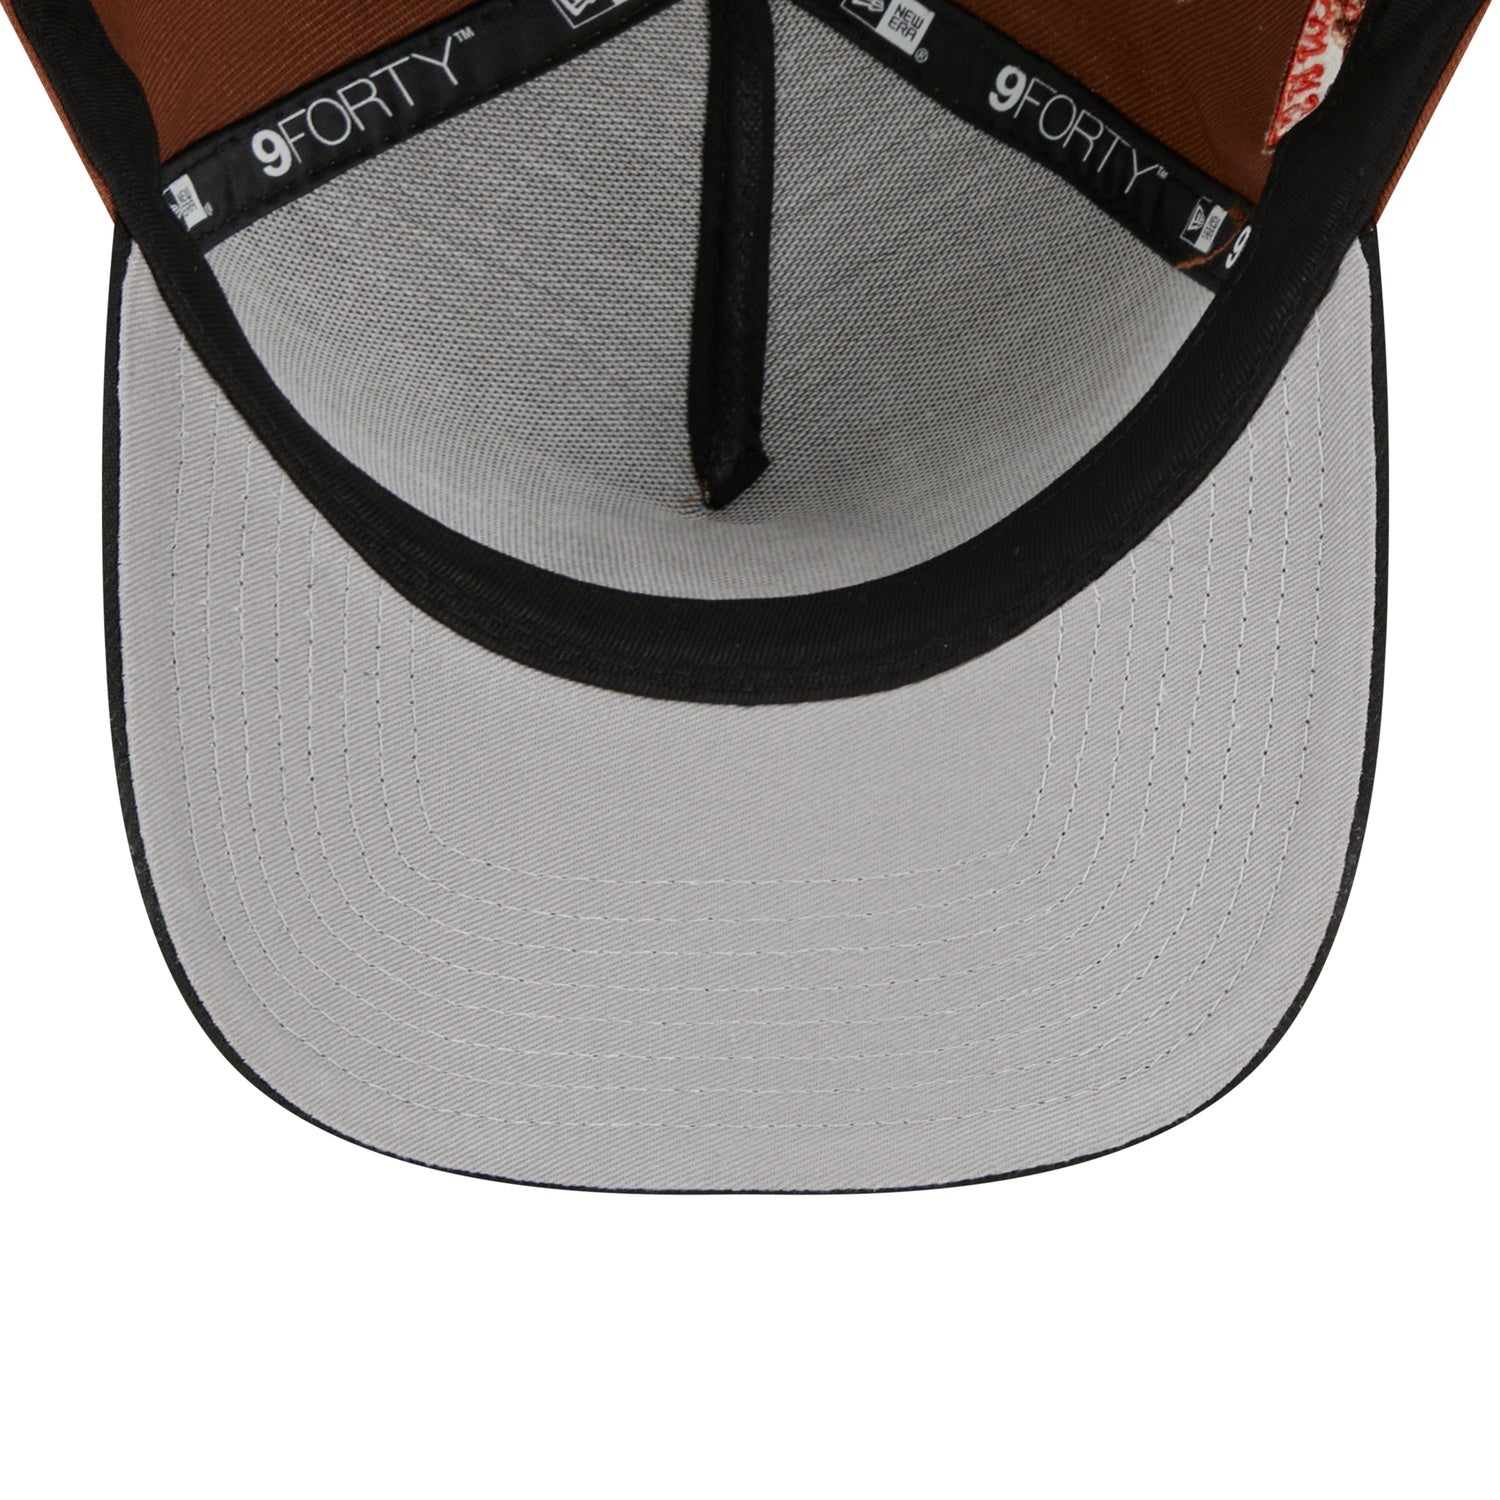 NEW ERA 9FORTY A-FRAME ST. LOUIS BROWNS WORLD SERIES 1944 TWO TONE